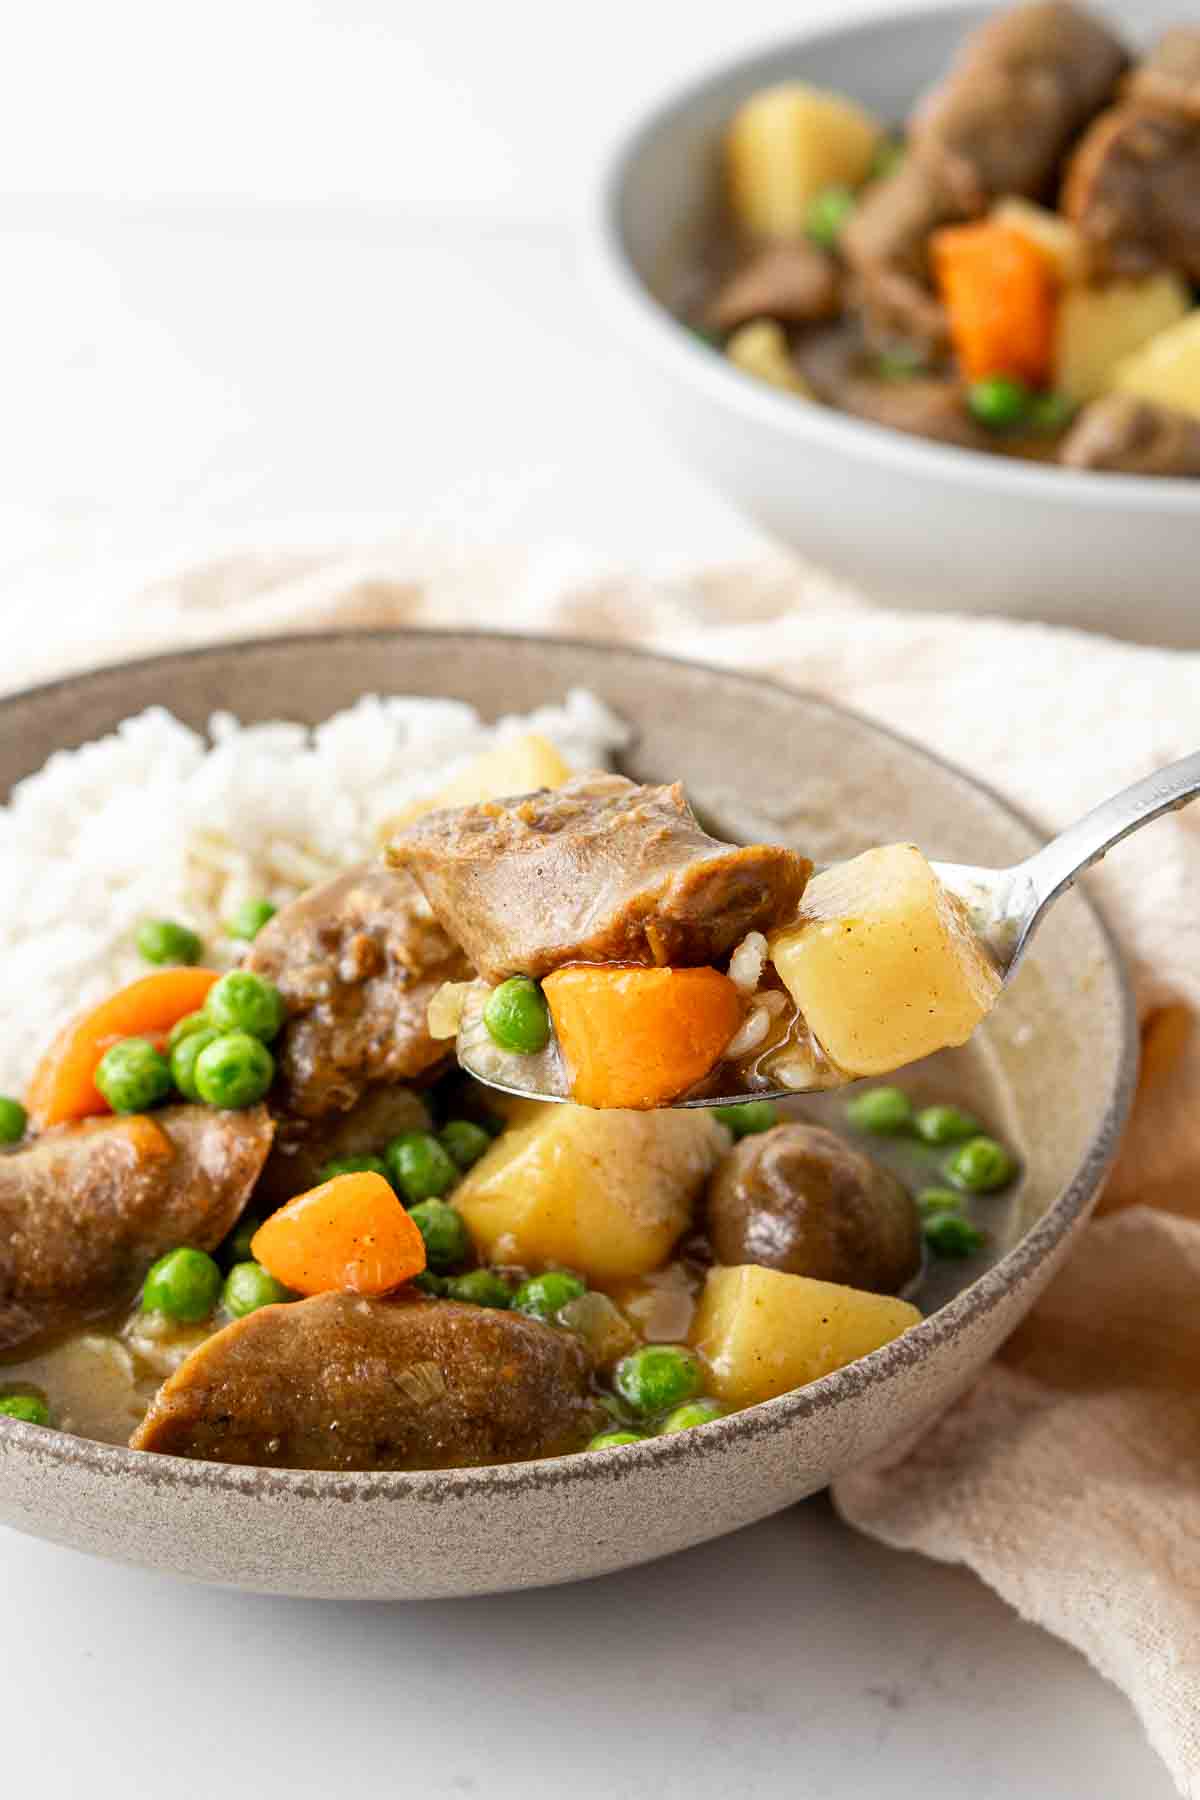 Spoonful of curried sausages in a bowl with rice.